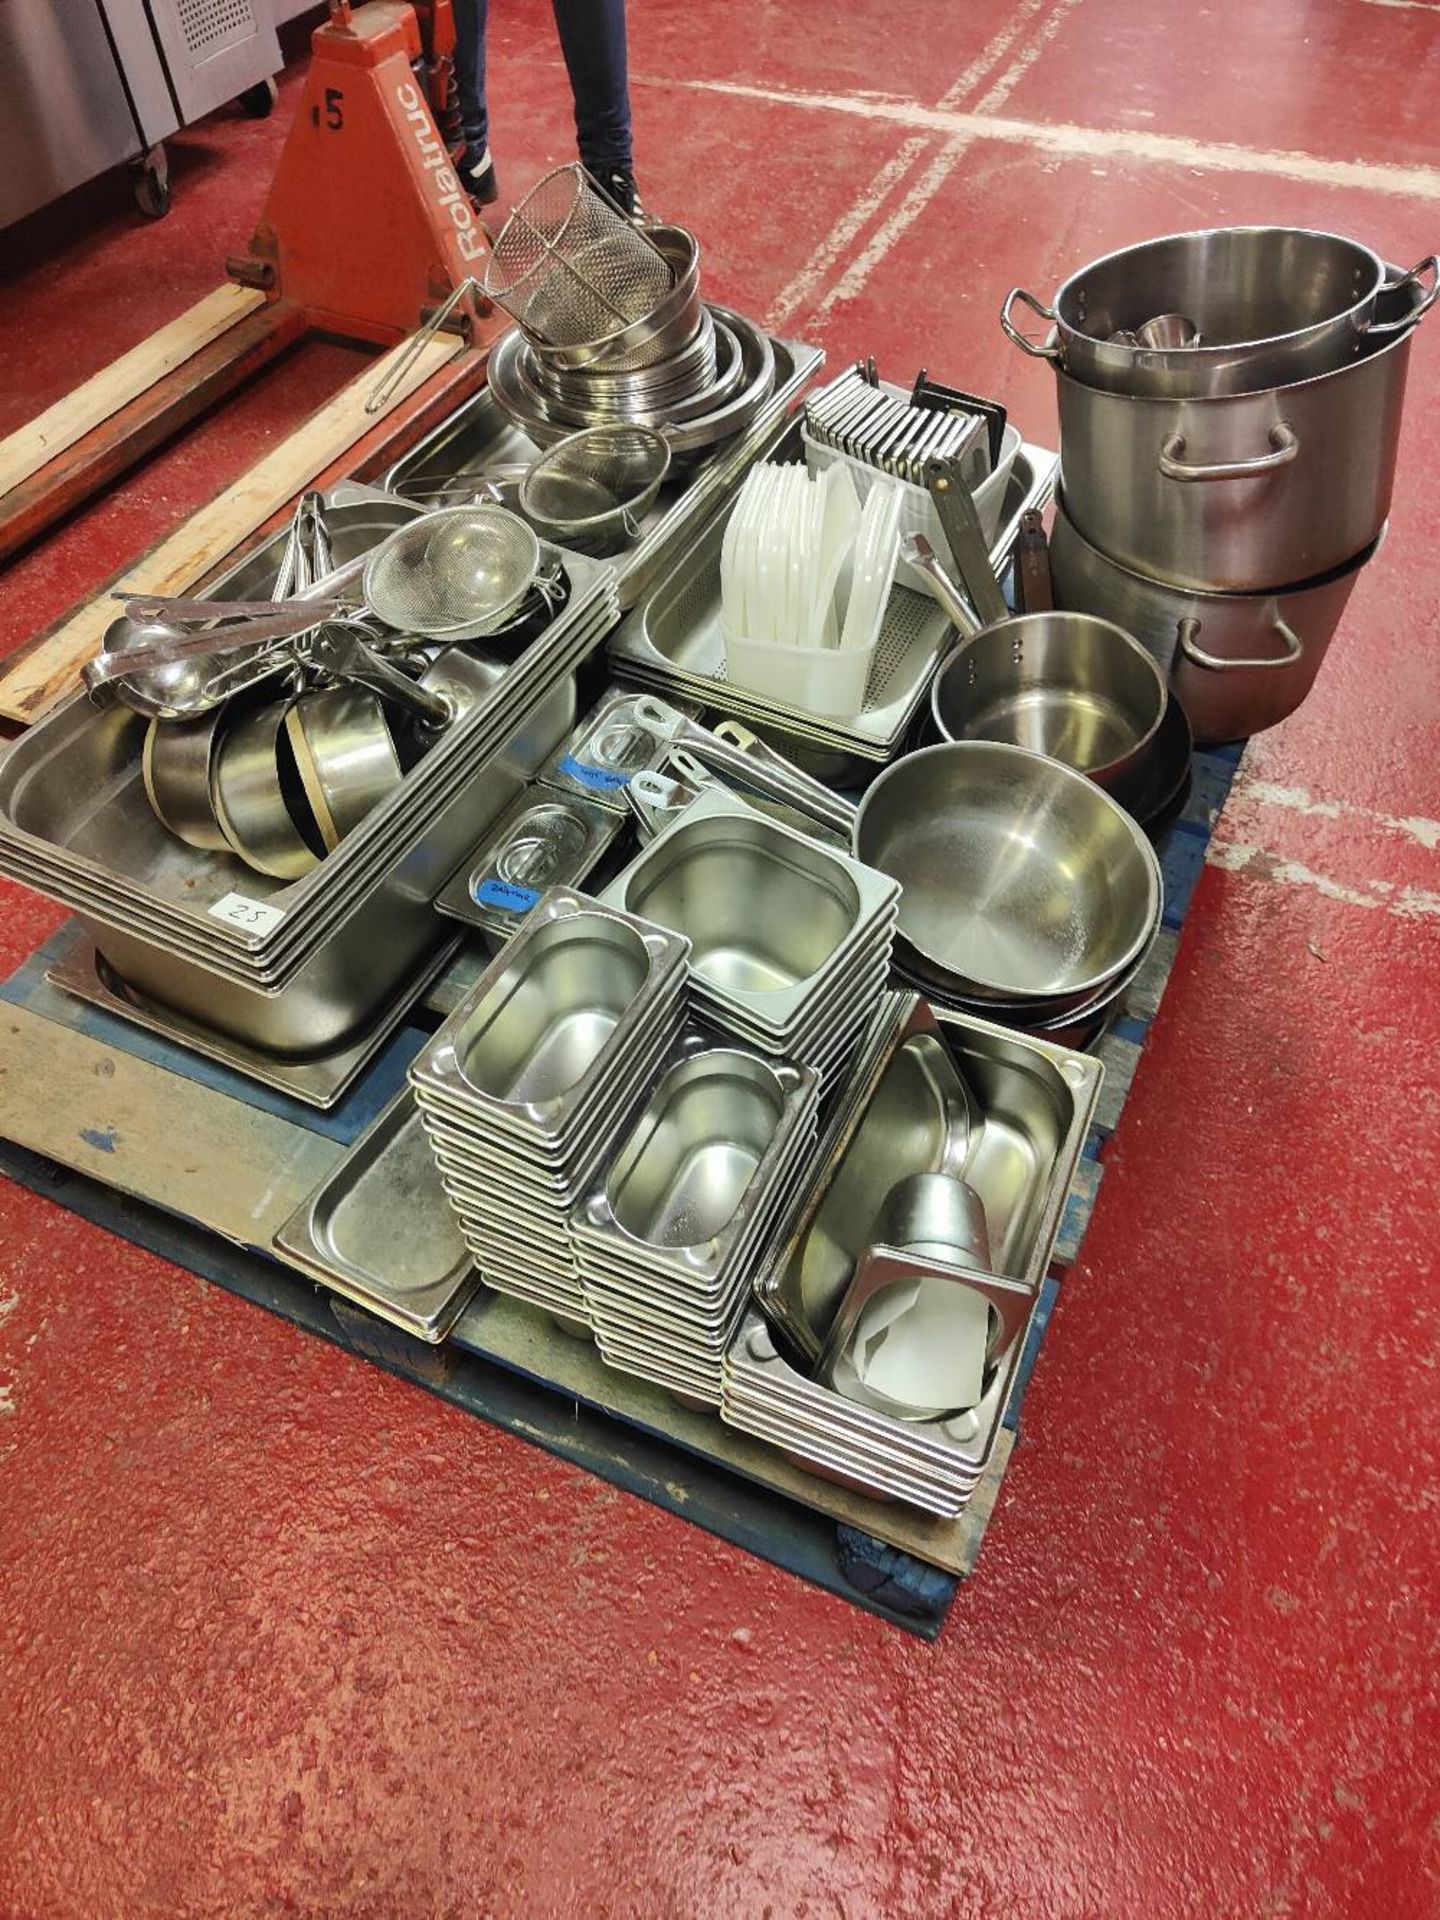 Large Quantity of Stainless Steel Cooking Equipment and Utensils - Image 2 of 4